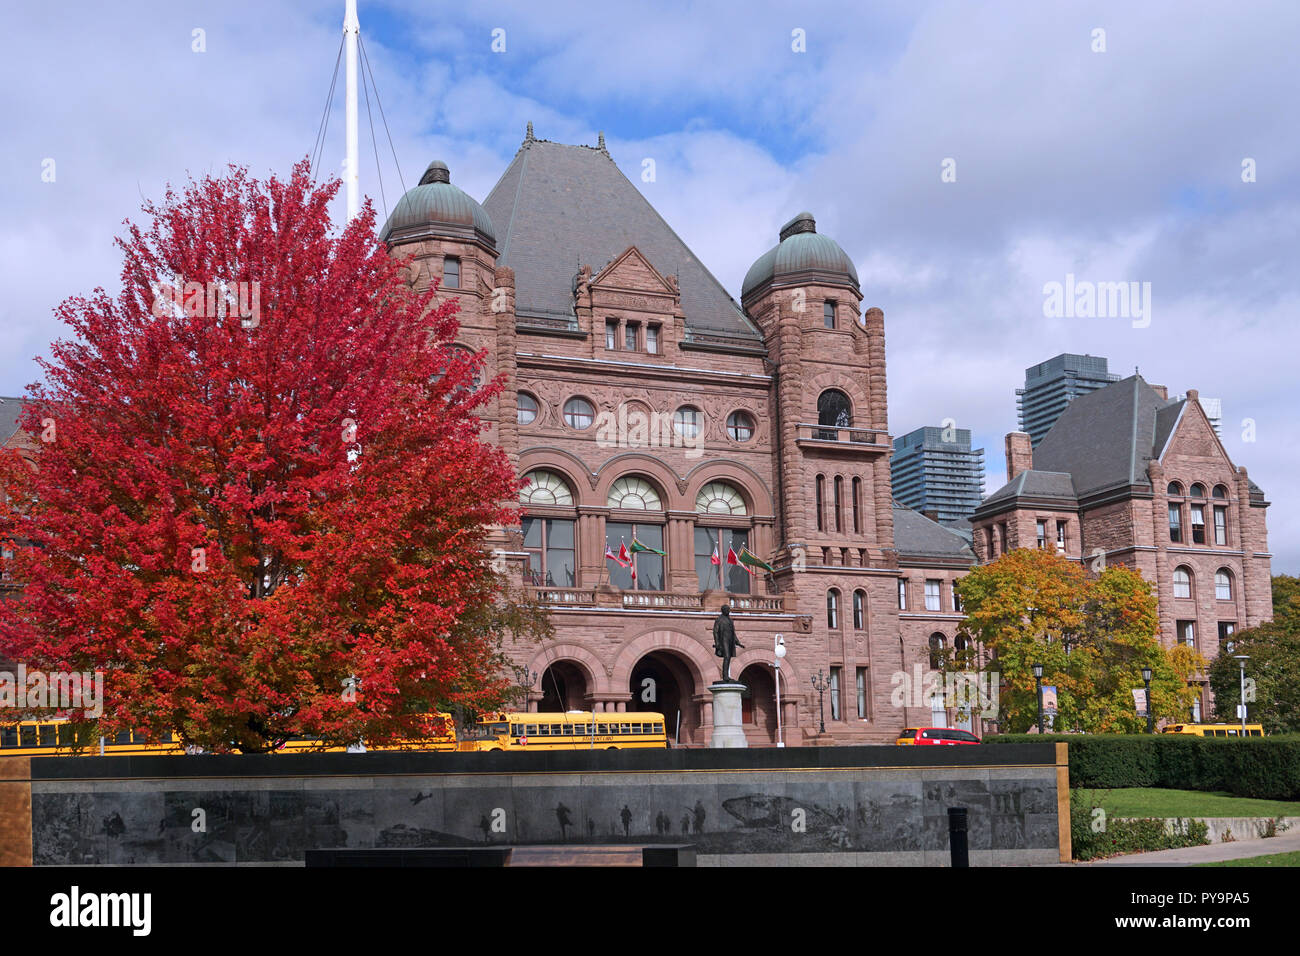 Close up view of the Ontario provincial parliament building surrounded by trees Stock Photo